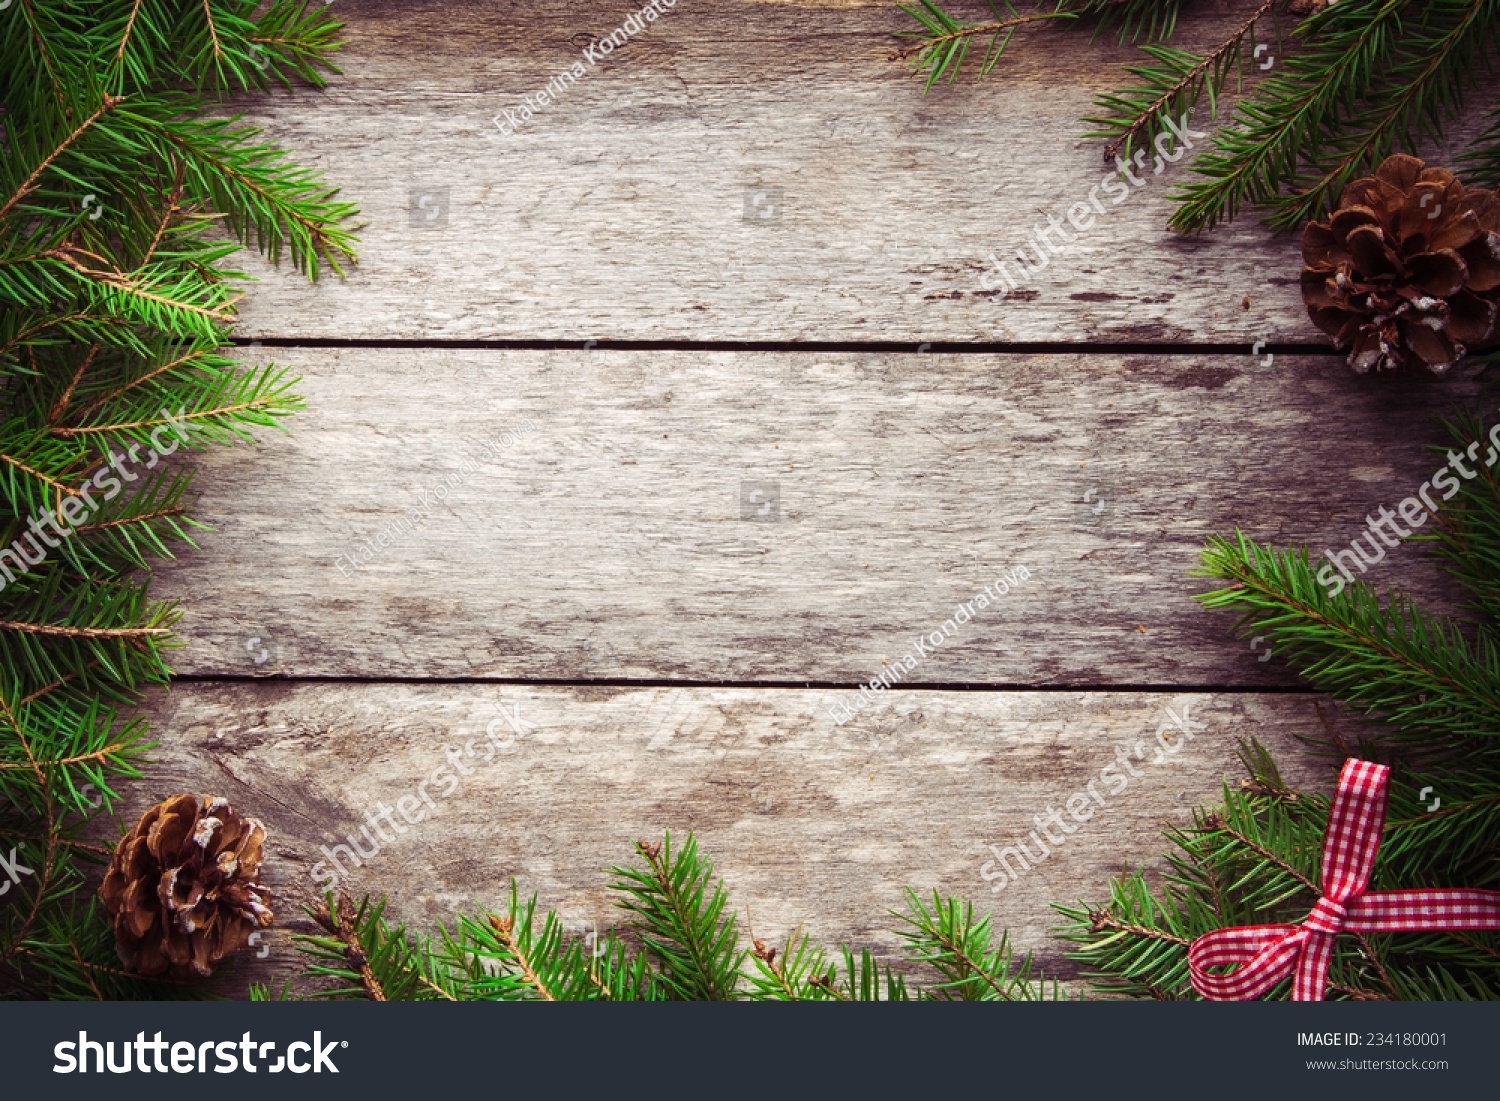 Christmas Background With Pine Tree, Rustic Wooden Planks Stock Photo ...